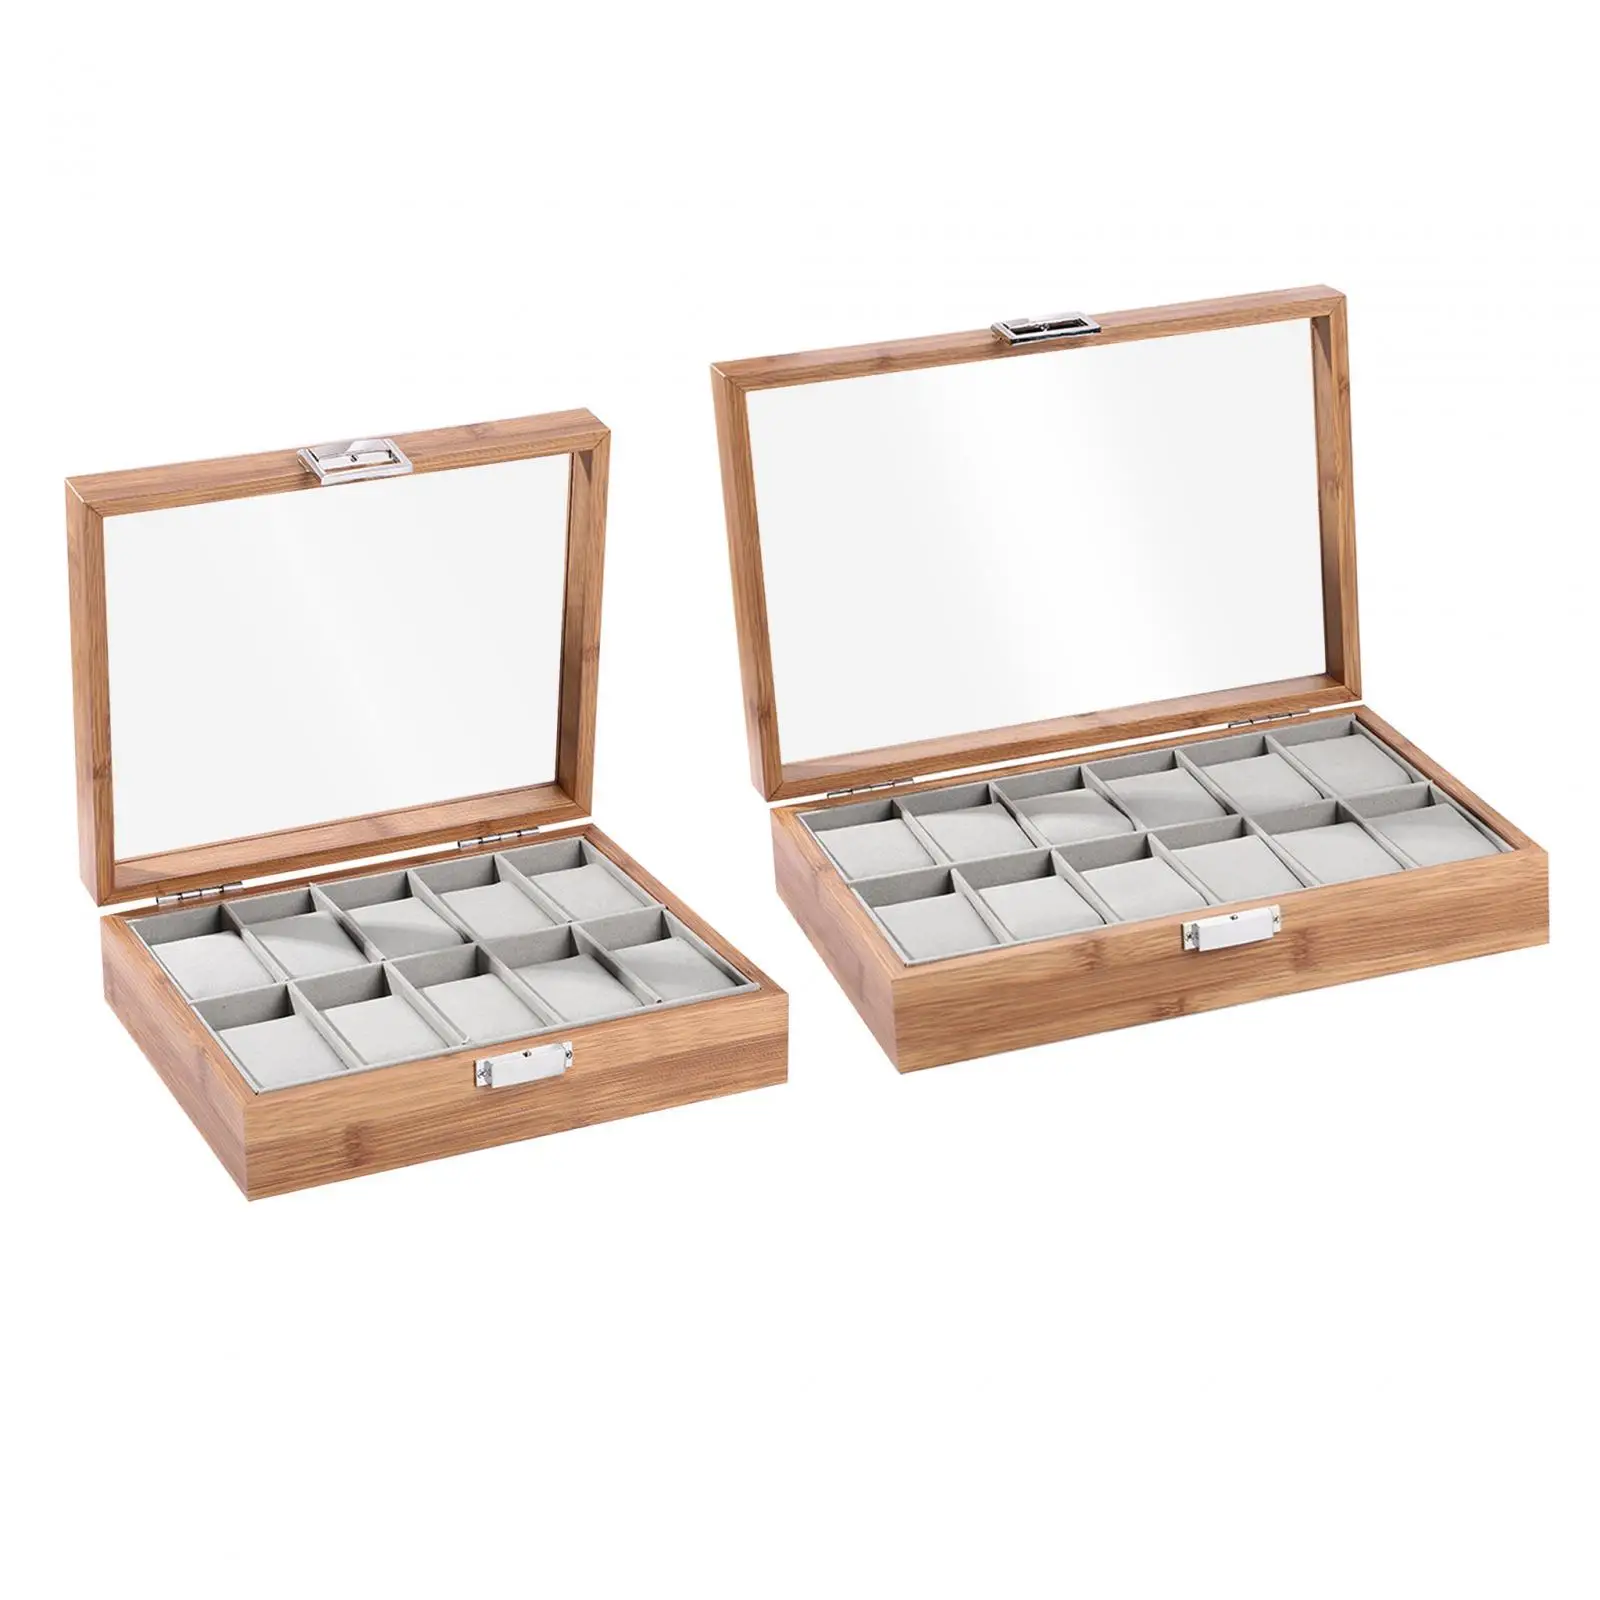 Watch Storage Box Portable Luxury Wooden Watches Box for Shop Display Home Decor Table Dresser Watches Jewelry Display Men Women